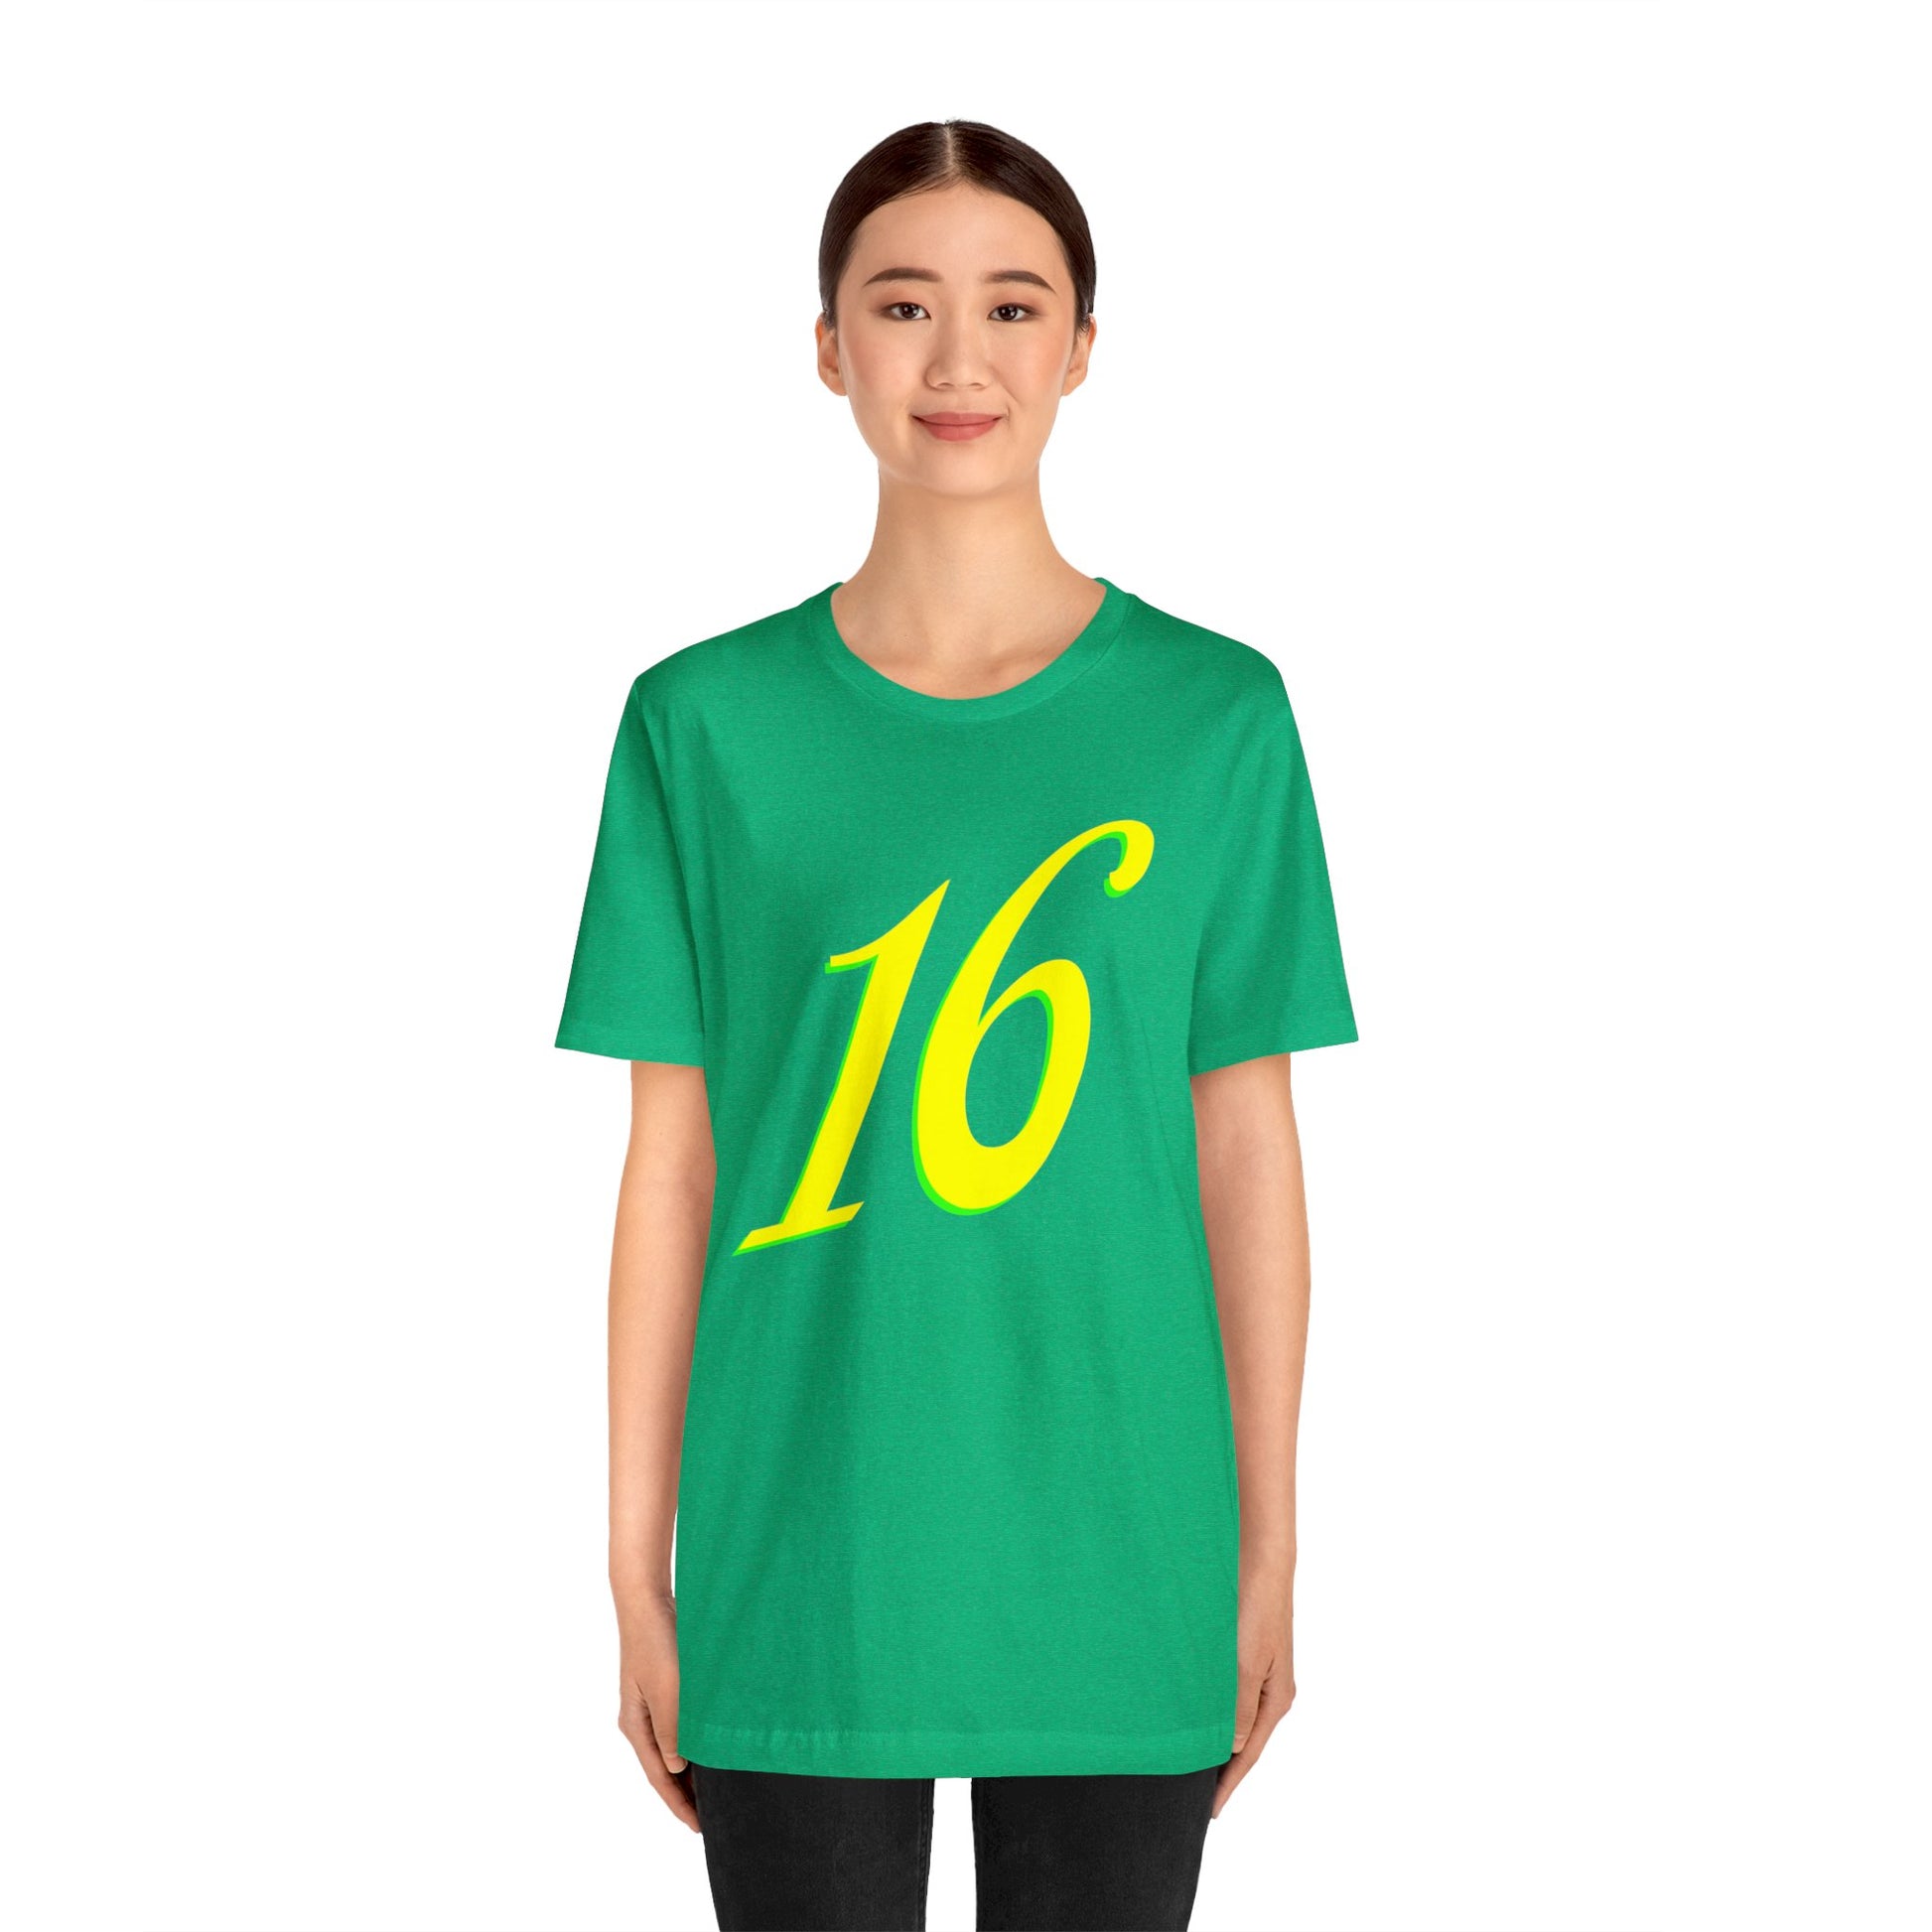 Number 16 Design - Soft Cotton Tee for birthdays and celebrations, Gift for friends and family, Multiple Options by clothezy.com in Black Size Medium - Buy Now